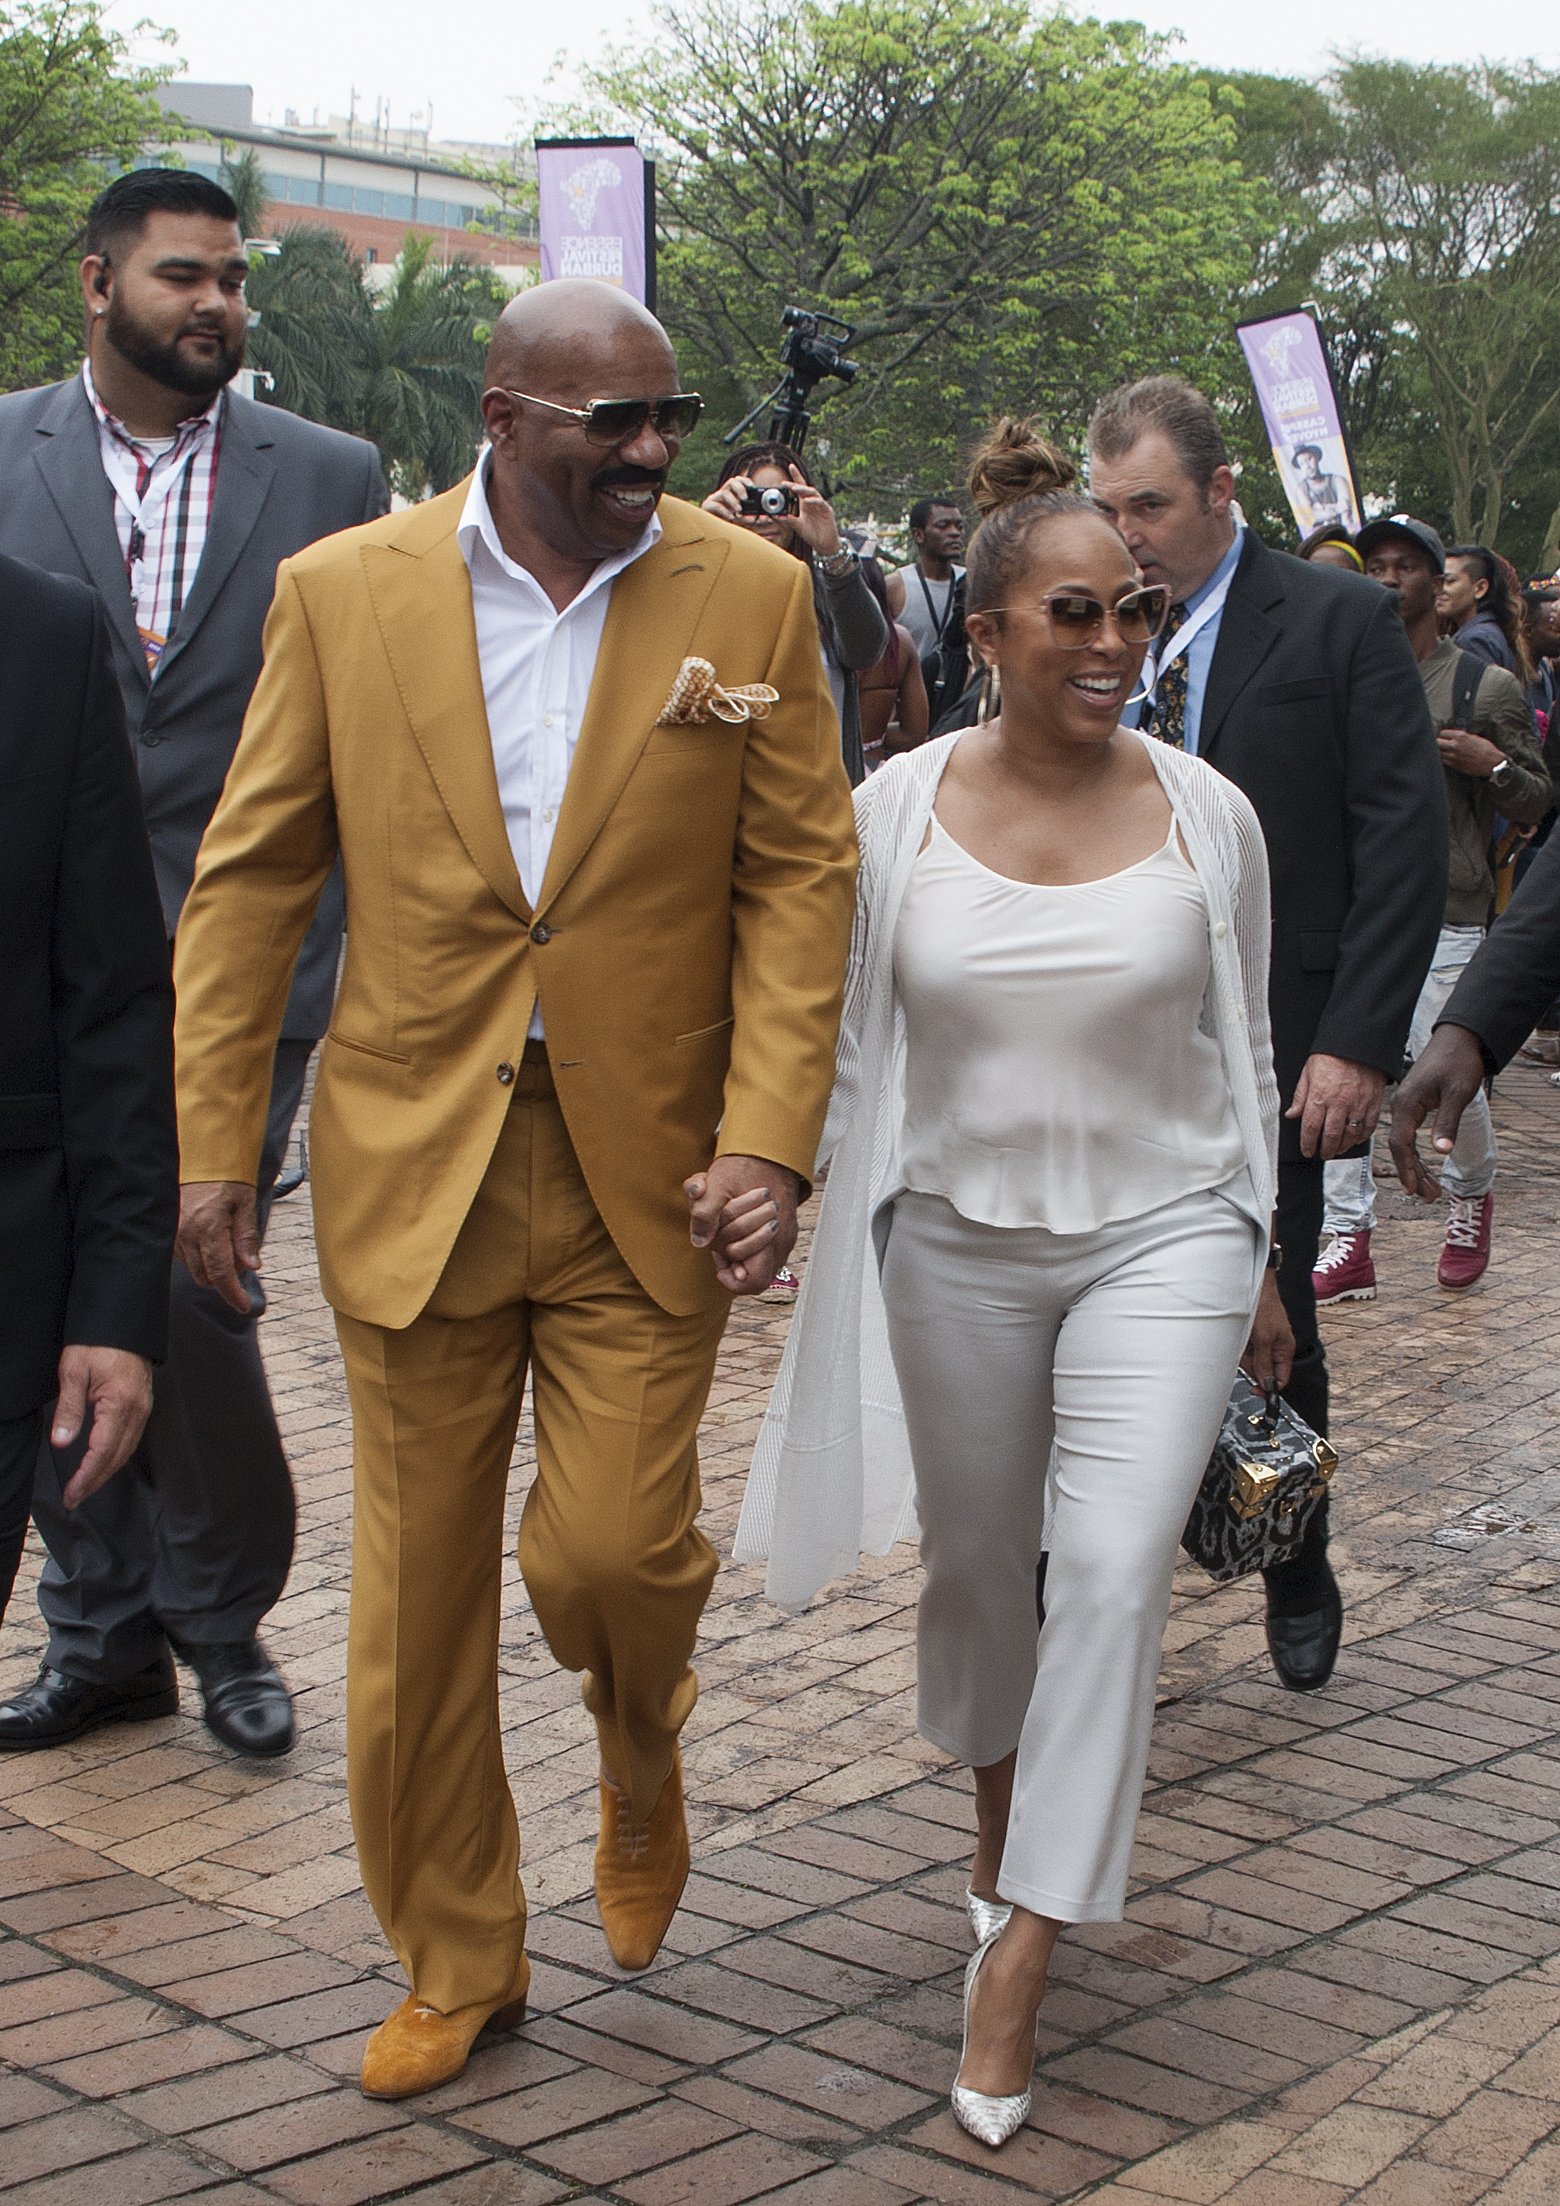 Steve Harvey and his wife Marjorie were photographed during the Essence Festival at the Durban International Convention Centre in Durban, South Africa | Source: Getty Images